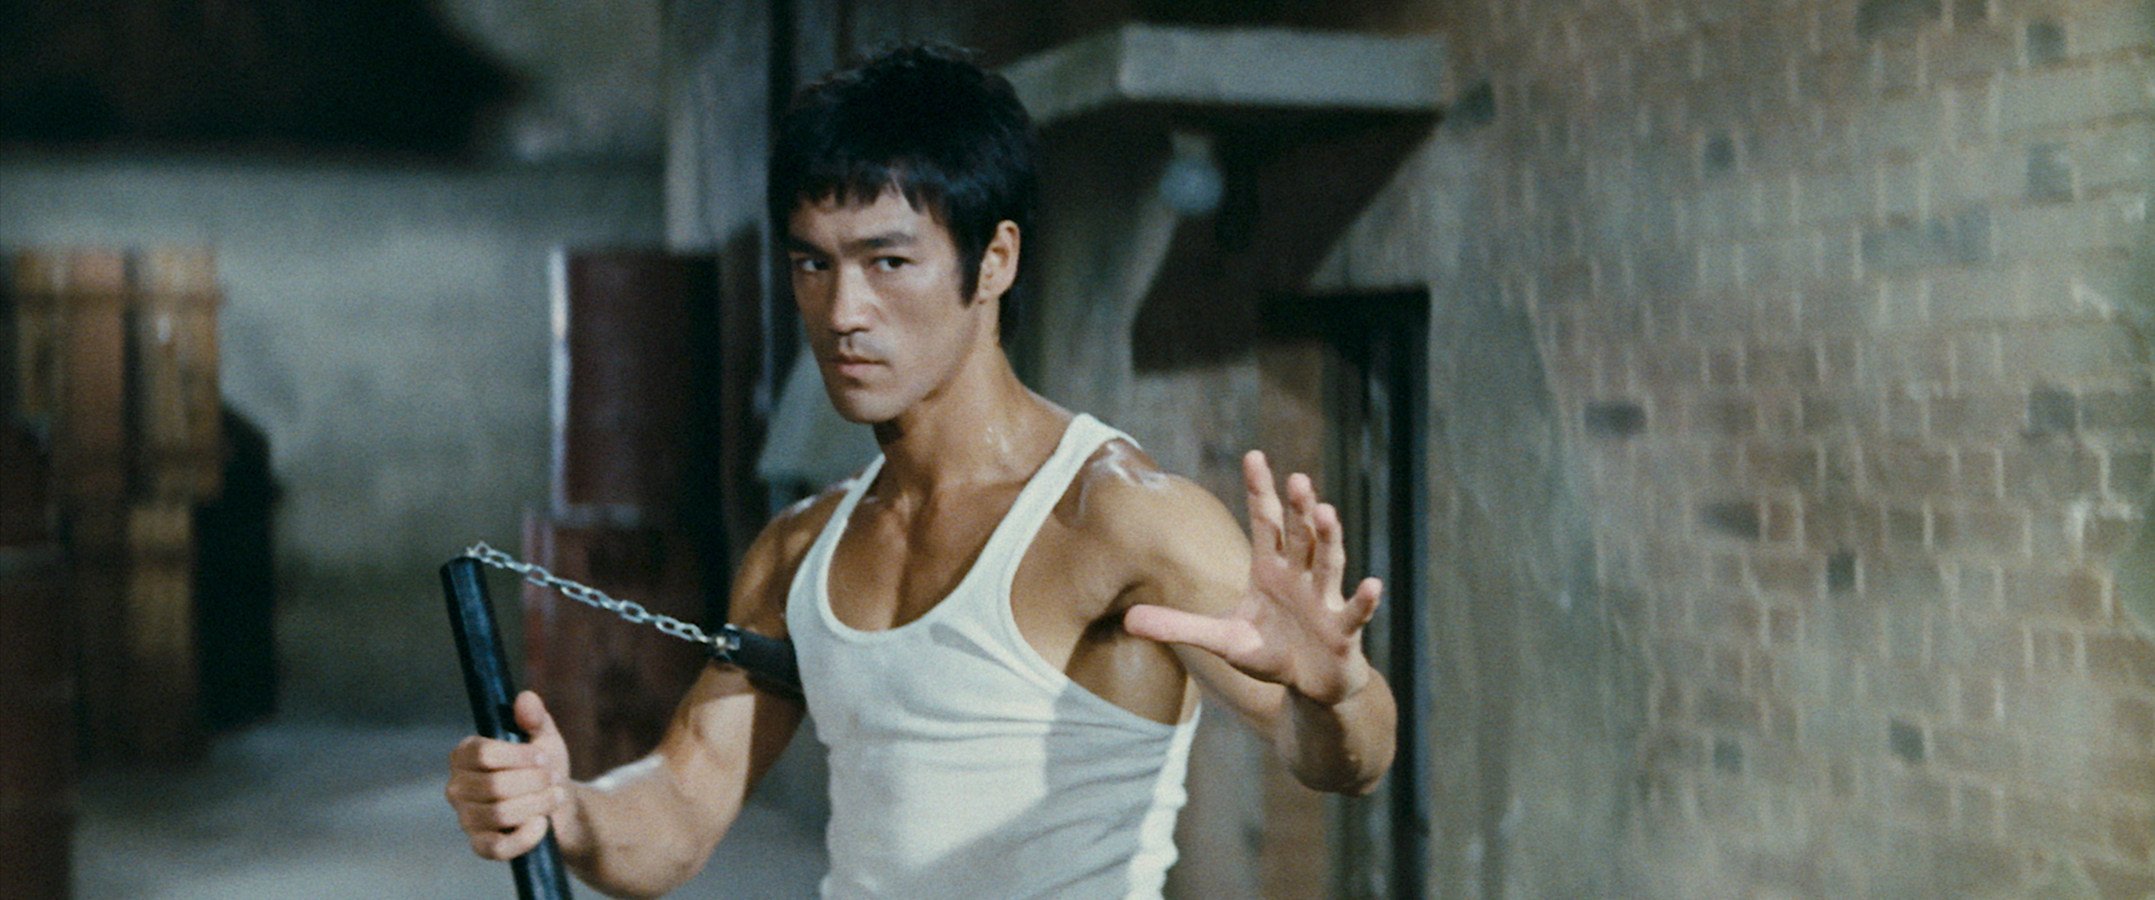 Bruce Lee in a still from Way of the Dragon. Photo: Criterion Collection